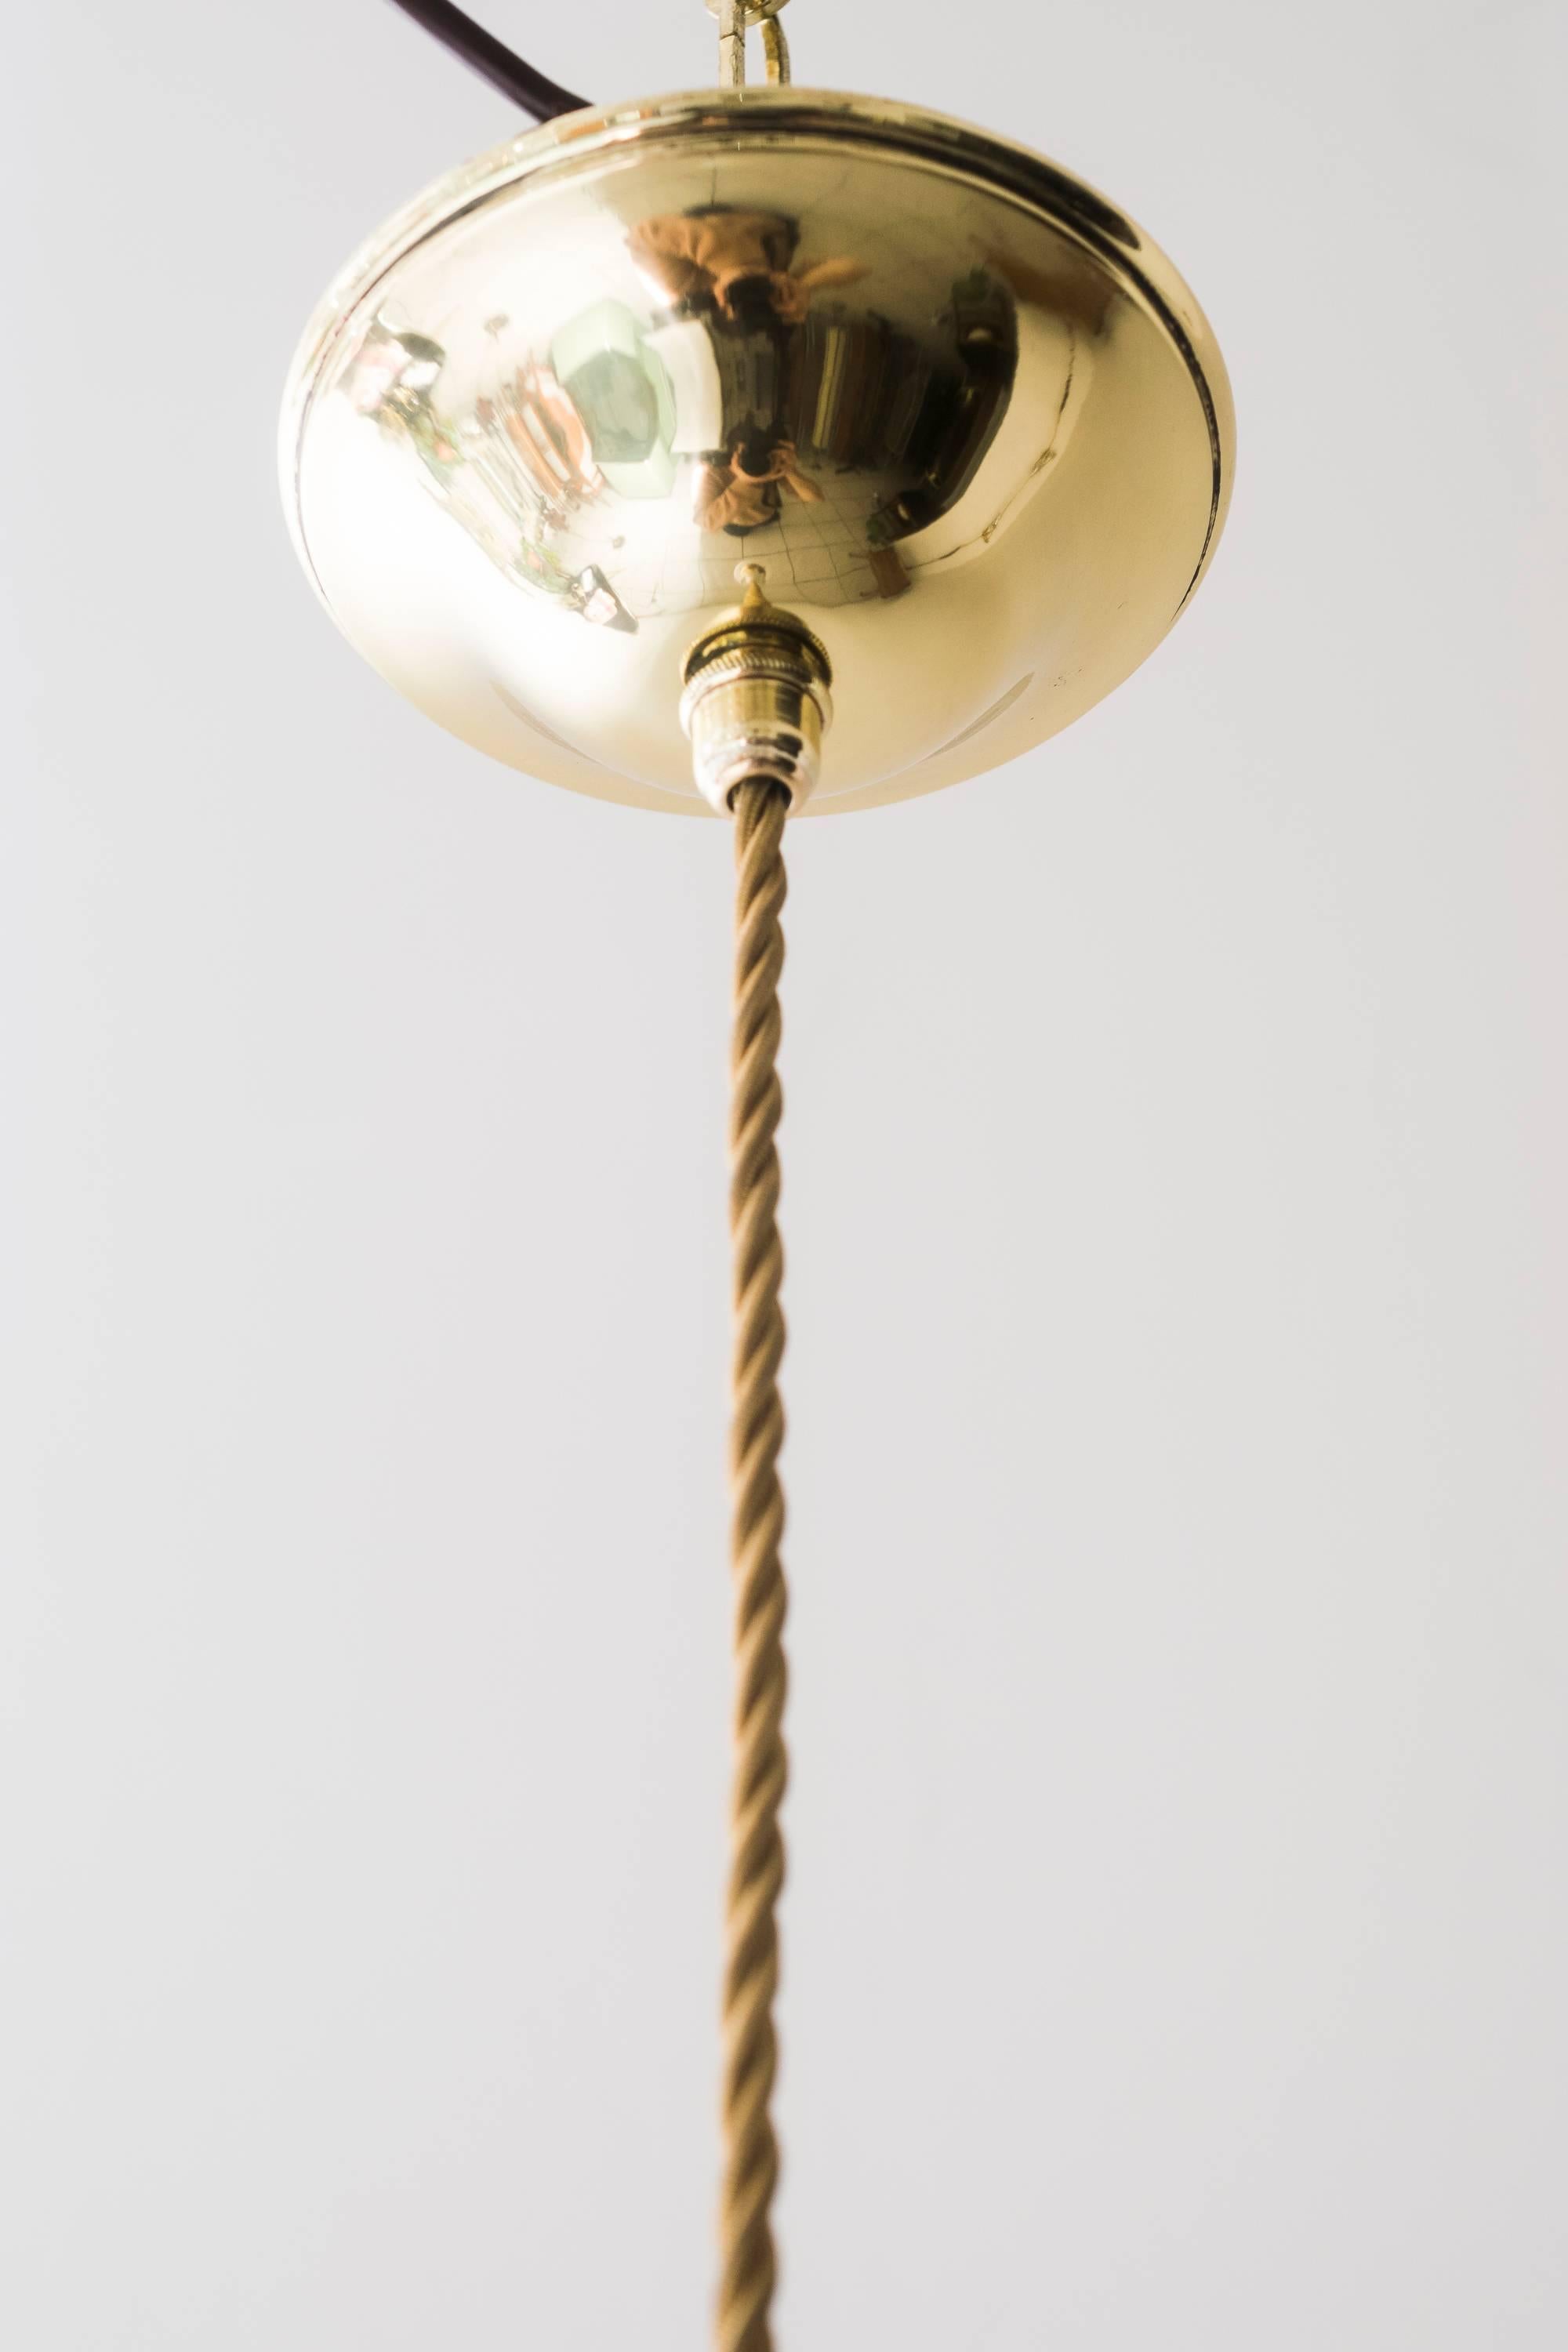 Polished Viennese Hanging Lamp circa 1905 with Loetz Lamp Shade Koloman Moser For Sale